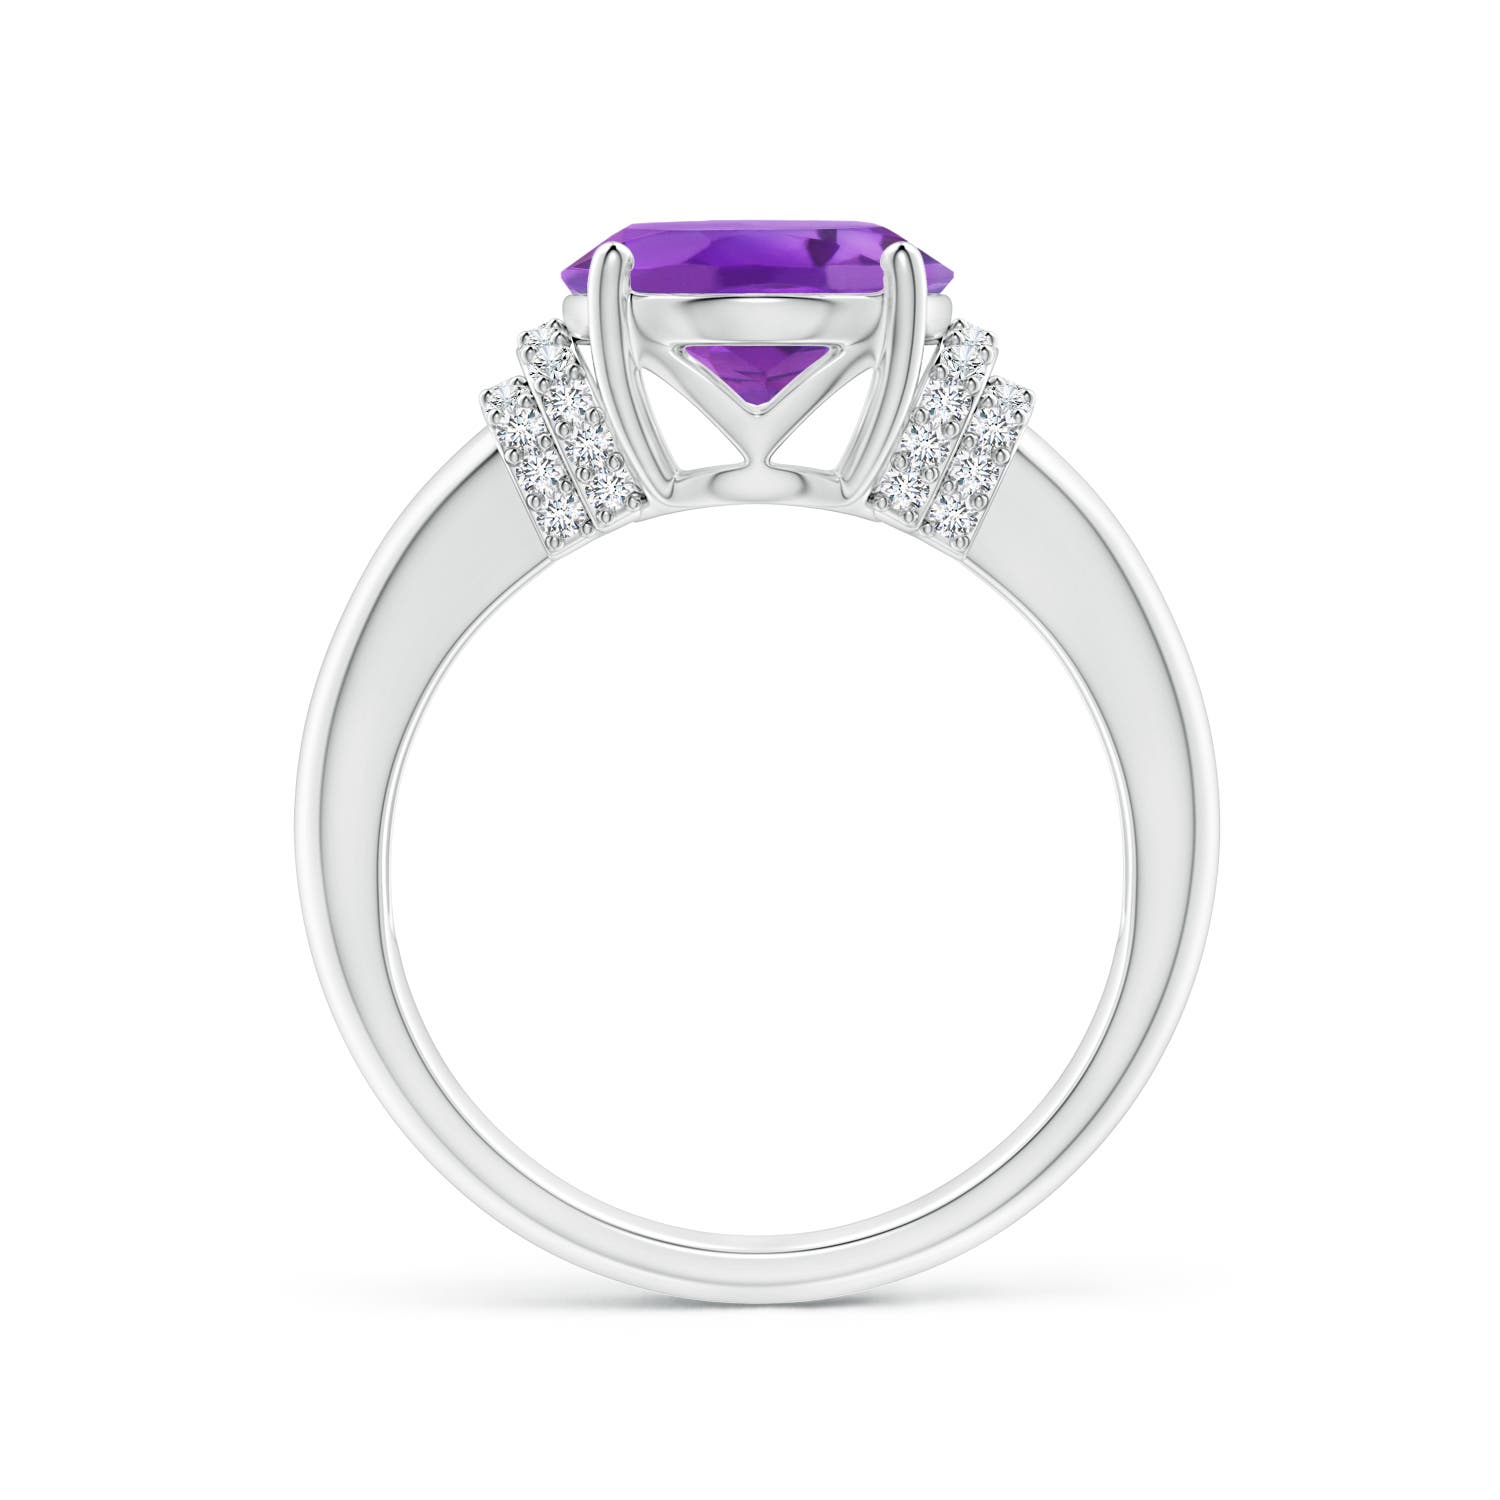 AA - Amethyst / 3.35 CT / 14 KT White Gold